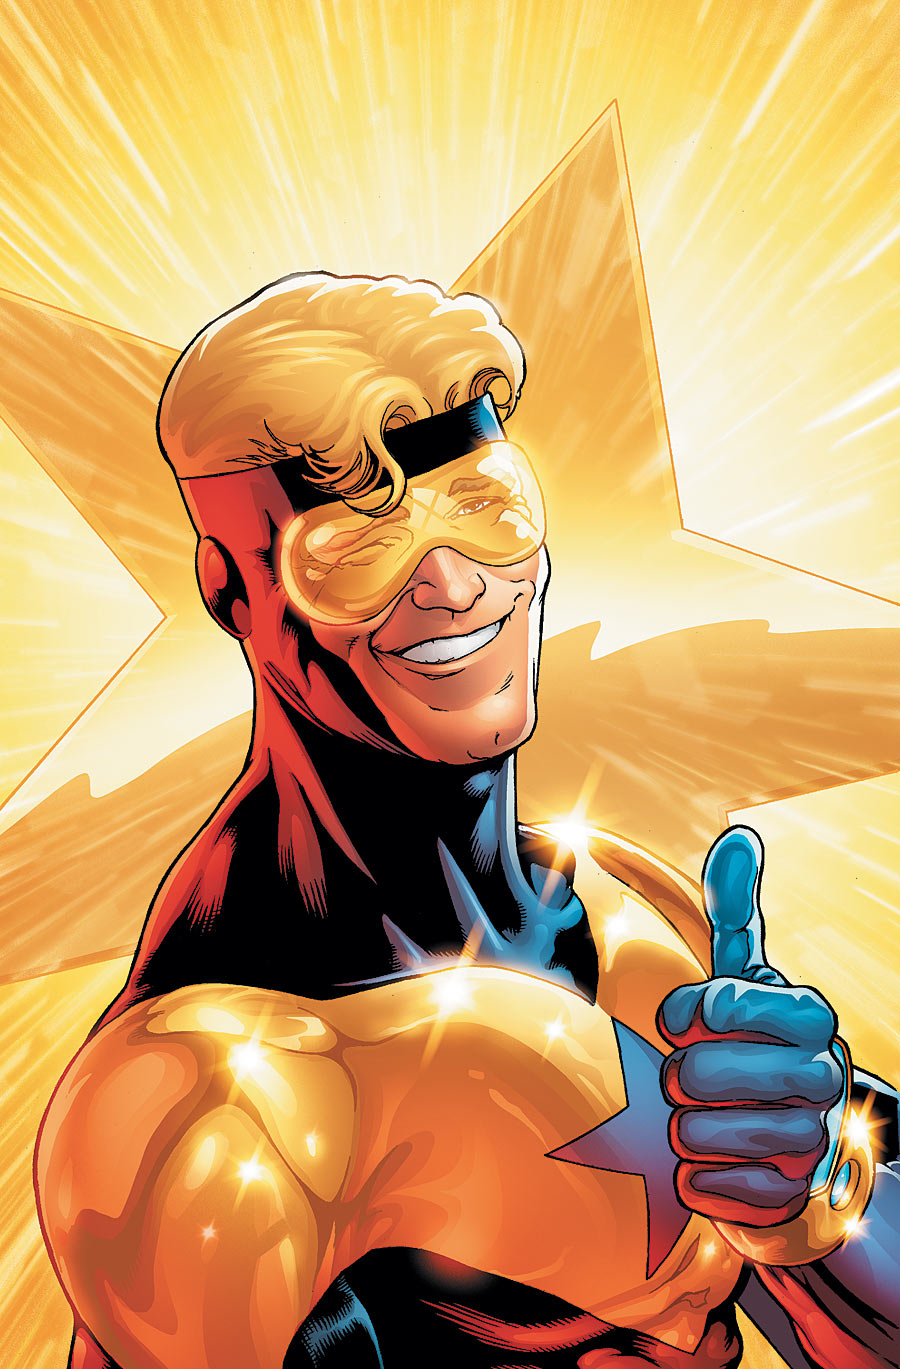 Booster Gold #11